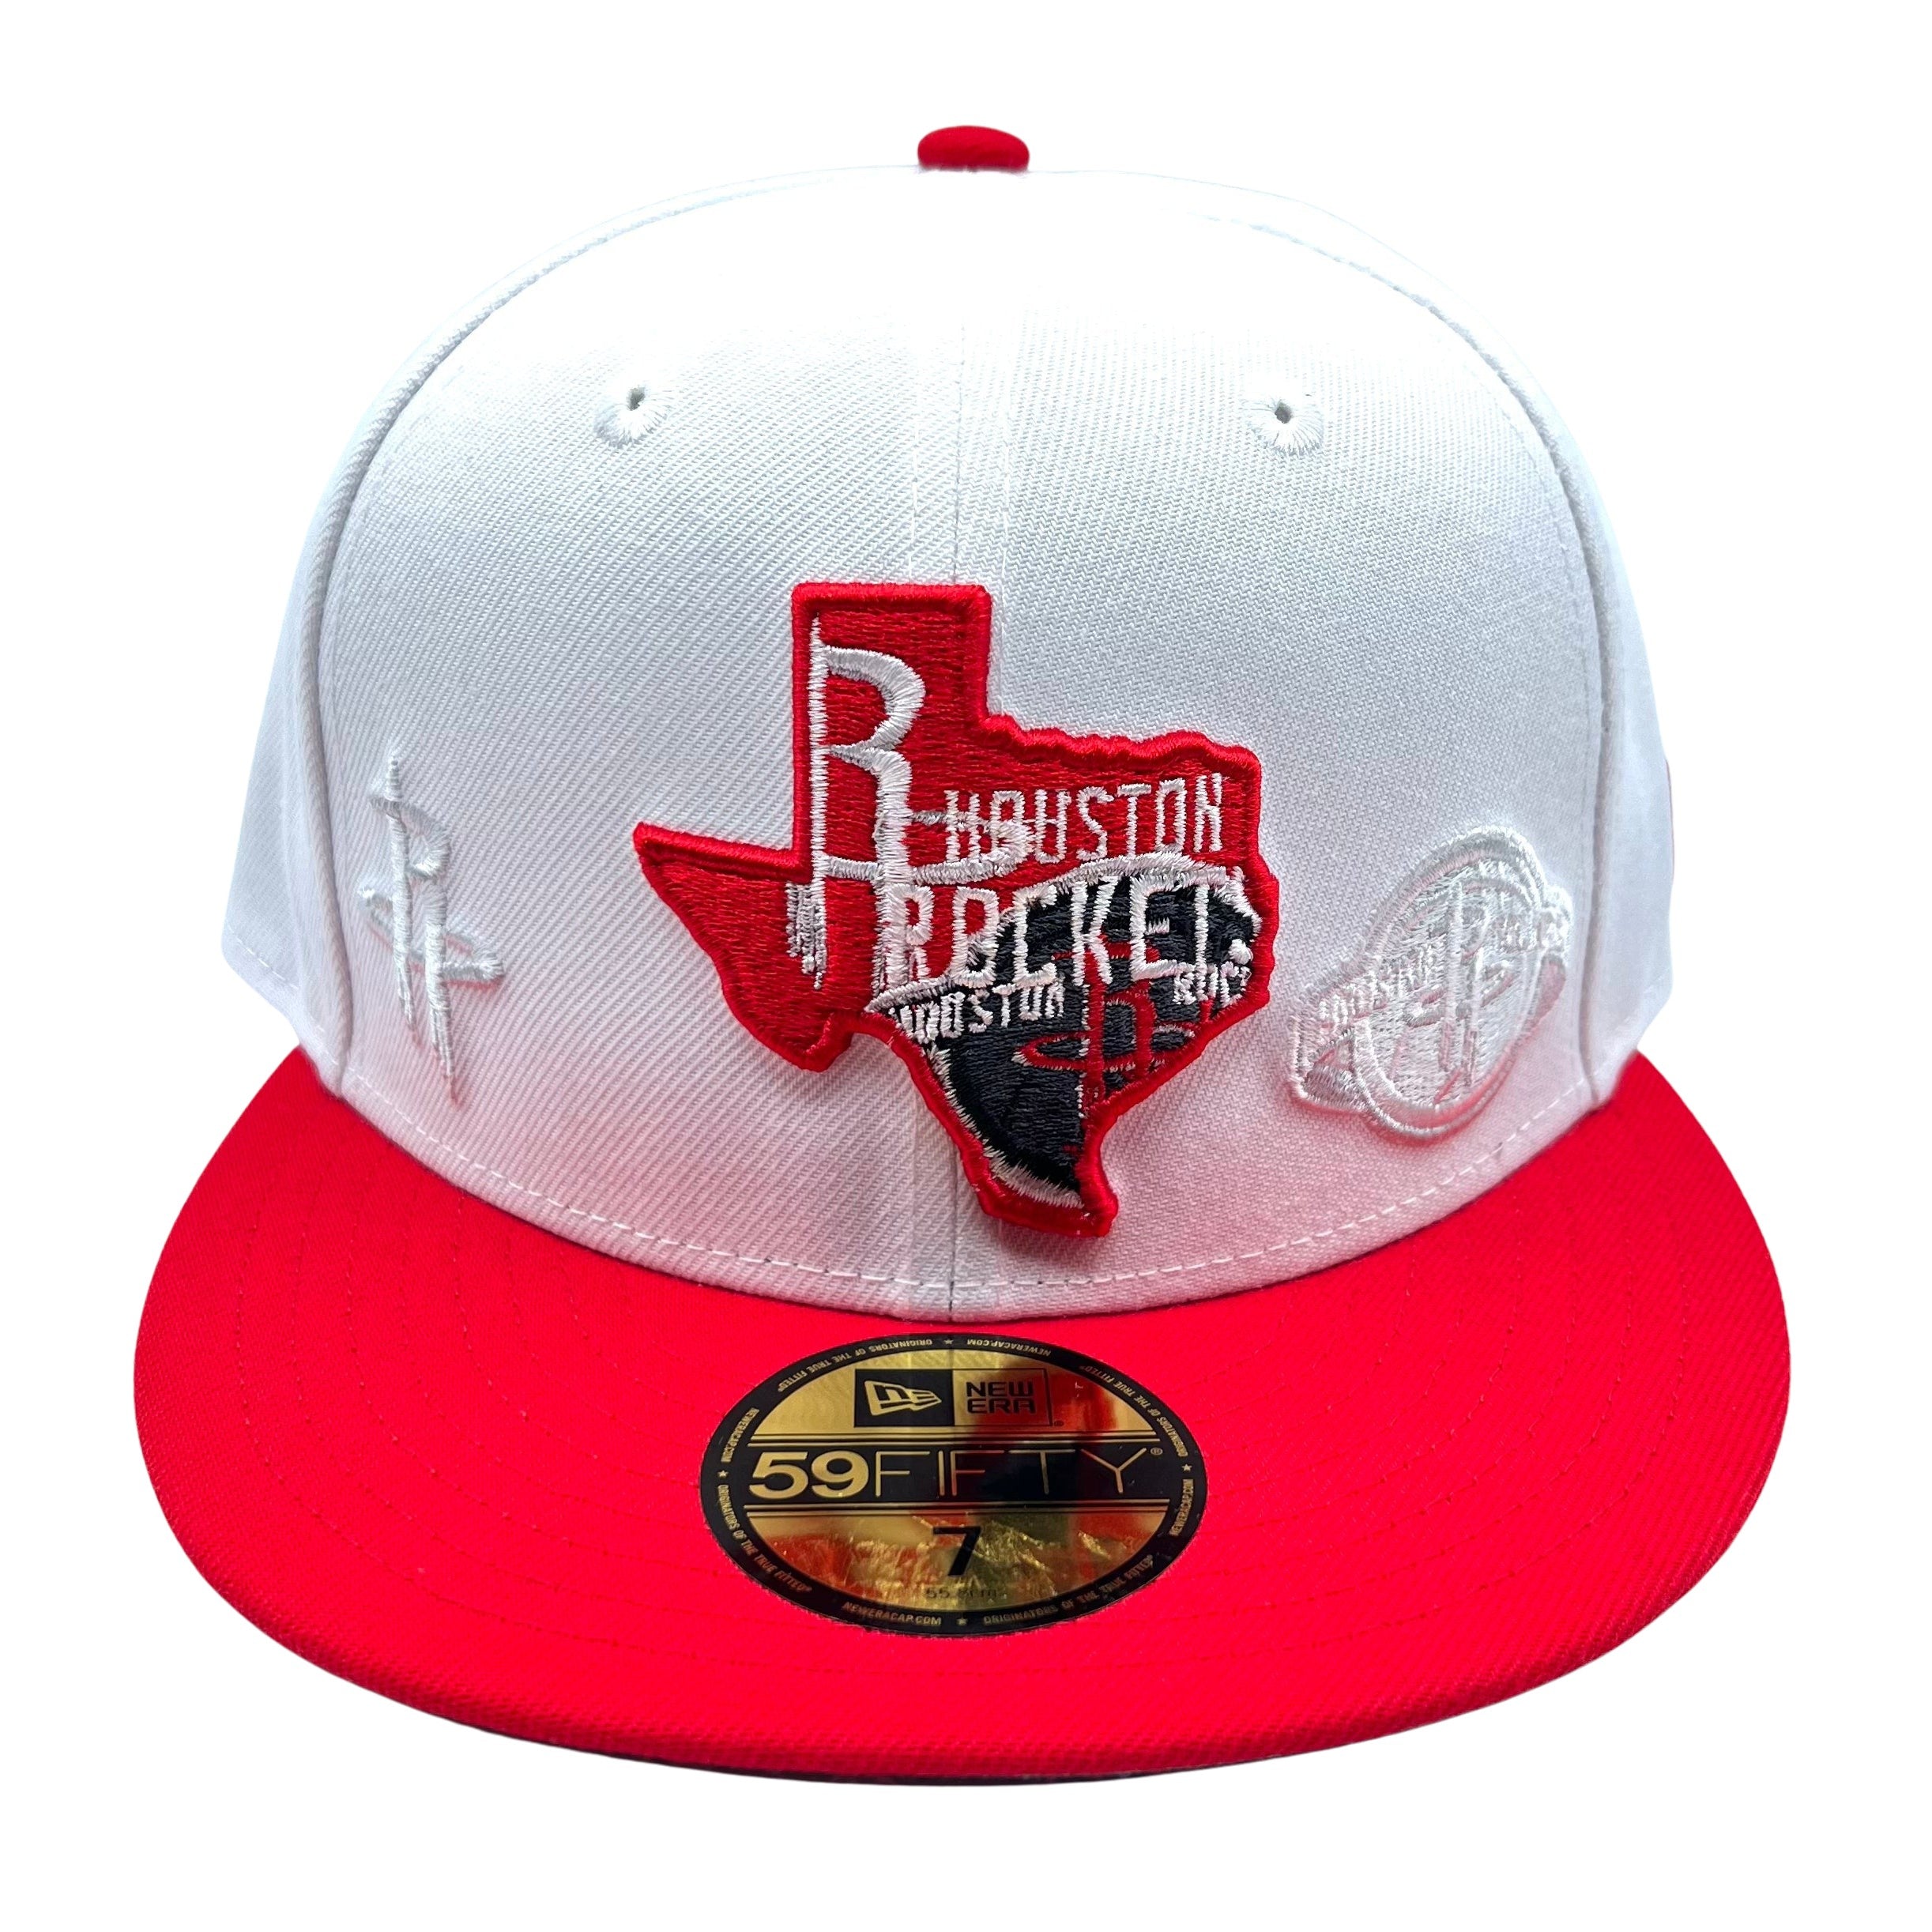 Houston Rockets (State of Texas)